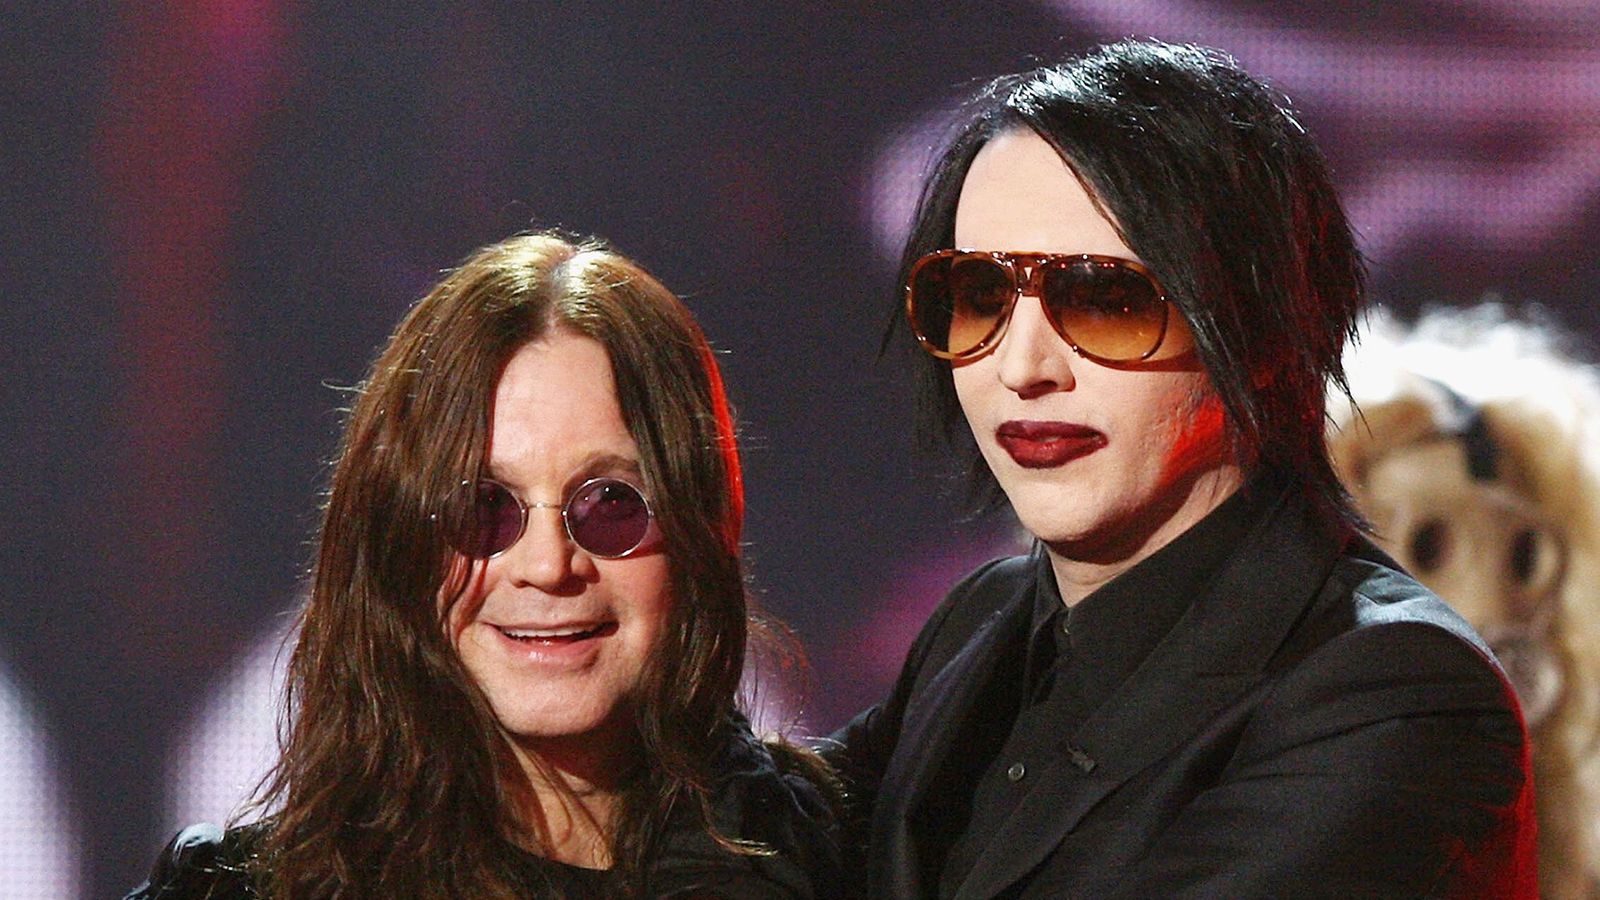 Ozzy Osbourne Enlists Marilyn Manson for North American Tour